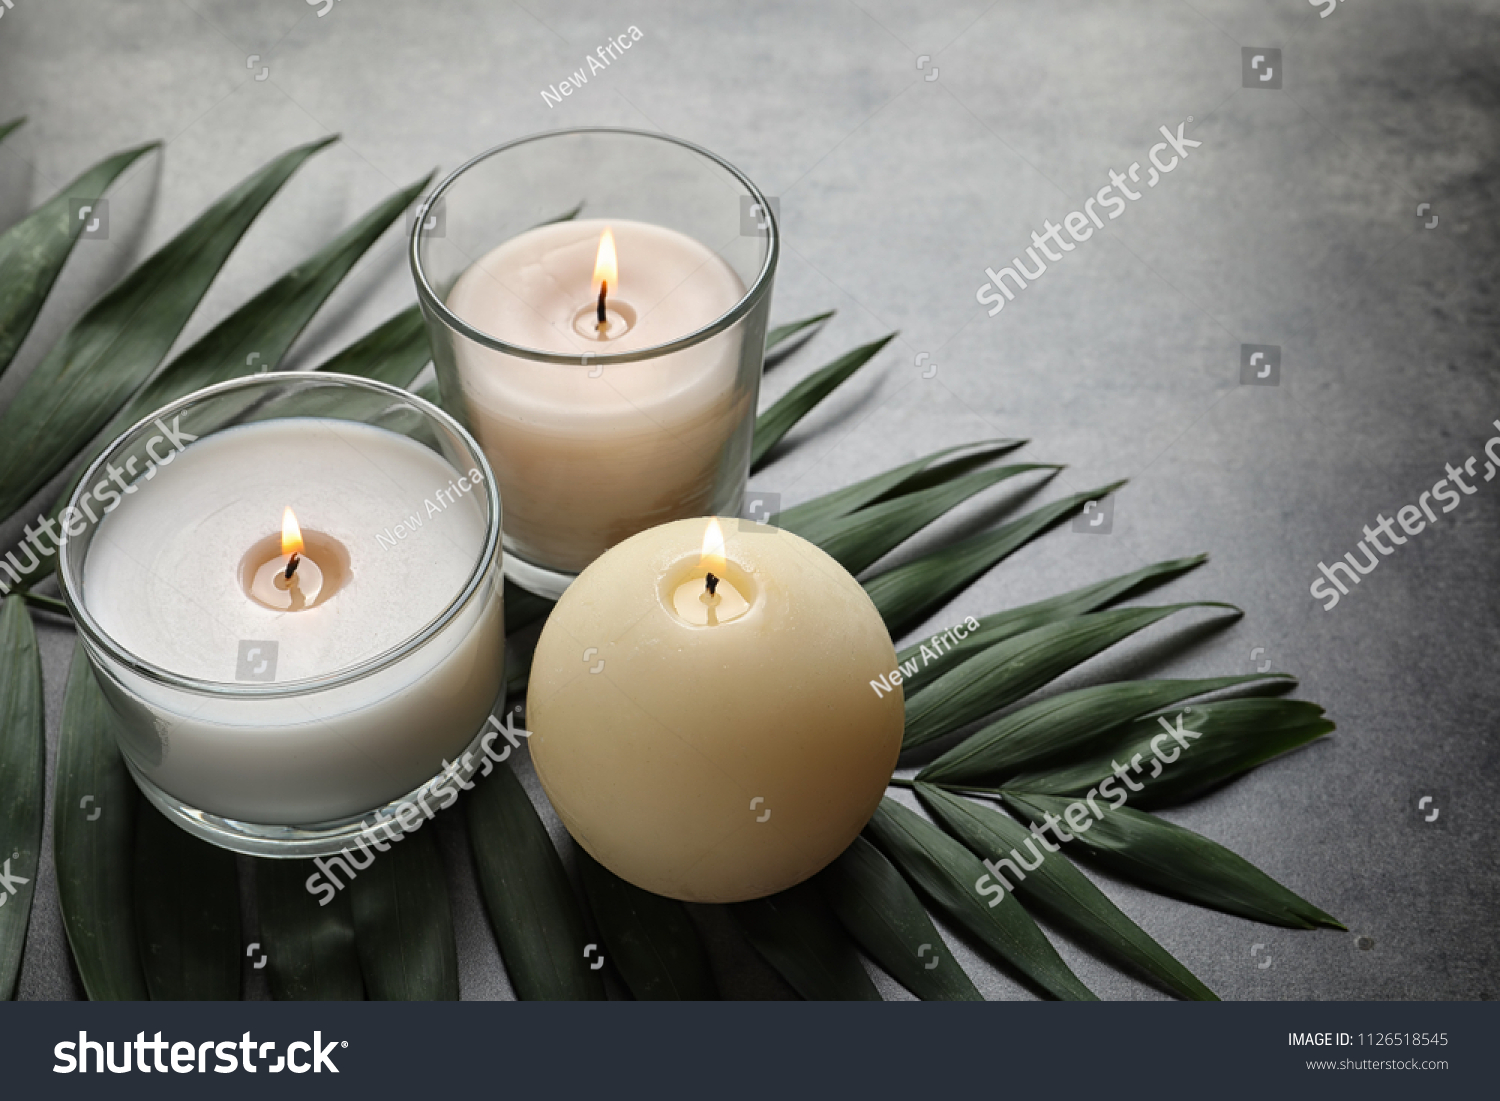 Burning wax candles and tropic leaf on table #1126518545